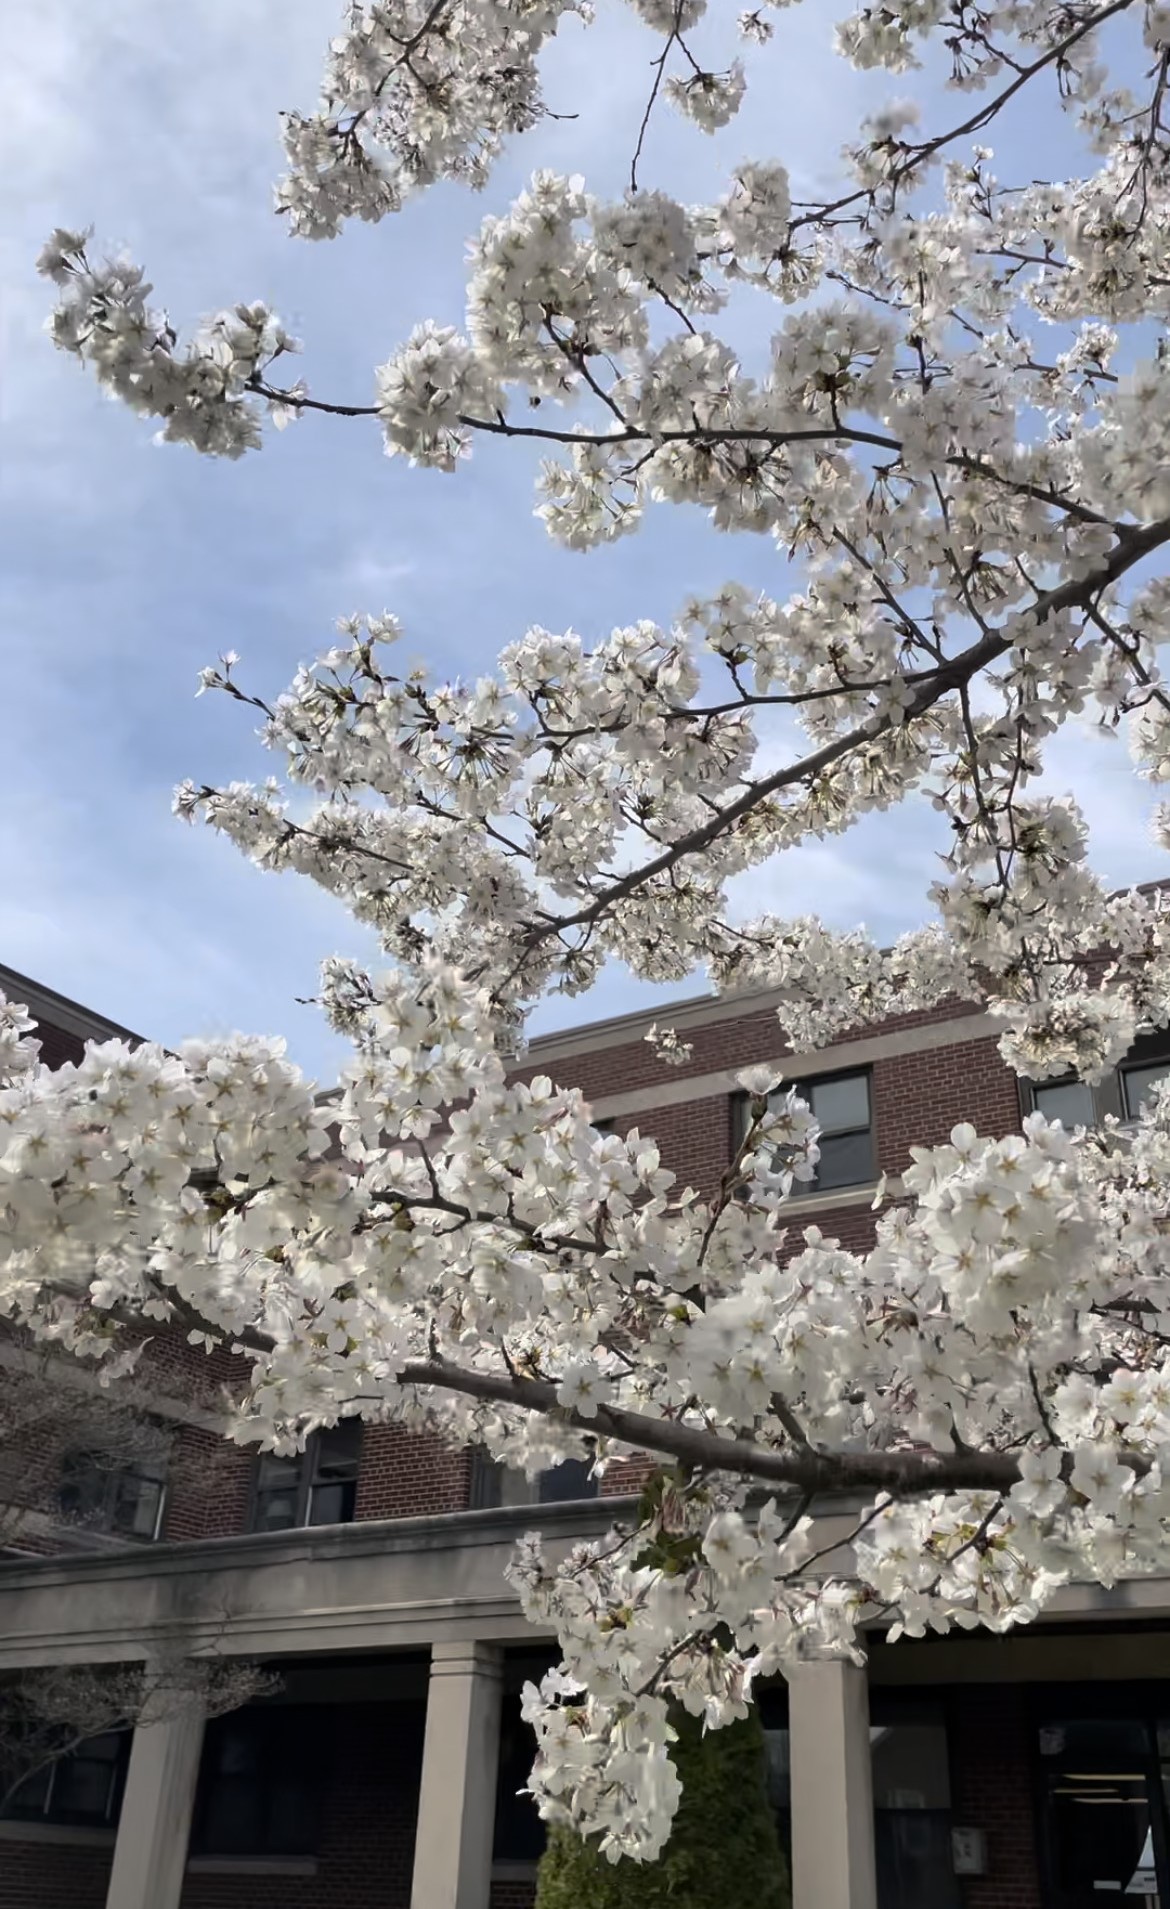 Yoshino Cherry tree in bloom, small white flower clusters on tree branches outside of Immaculata Hall